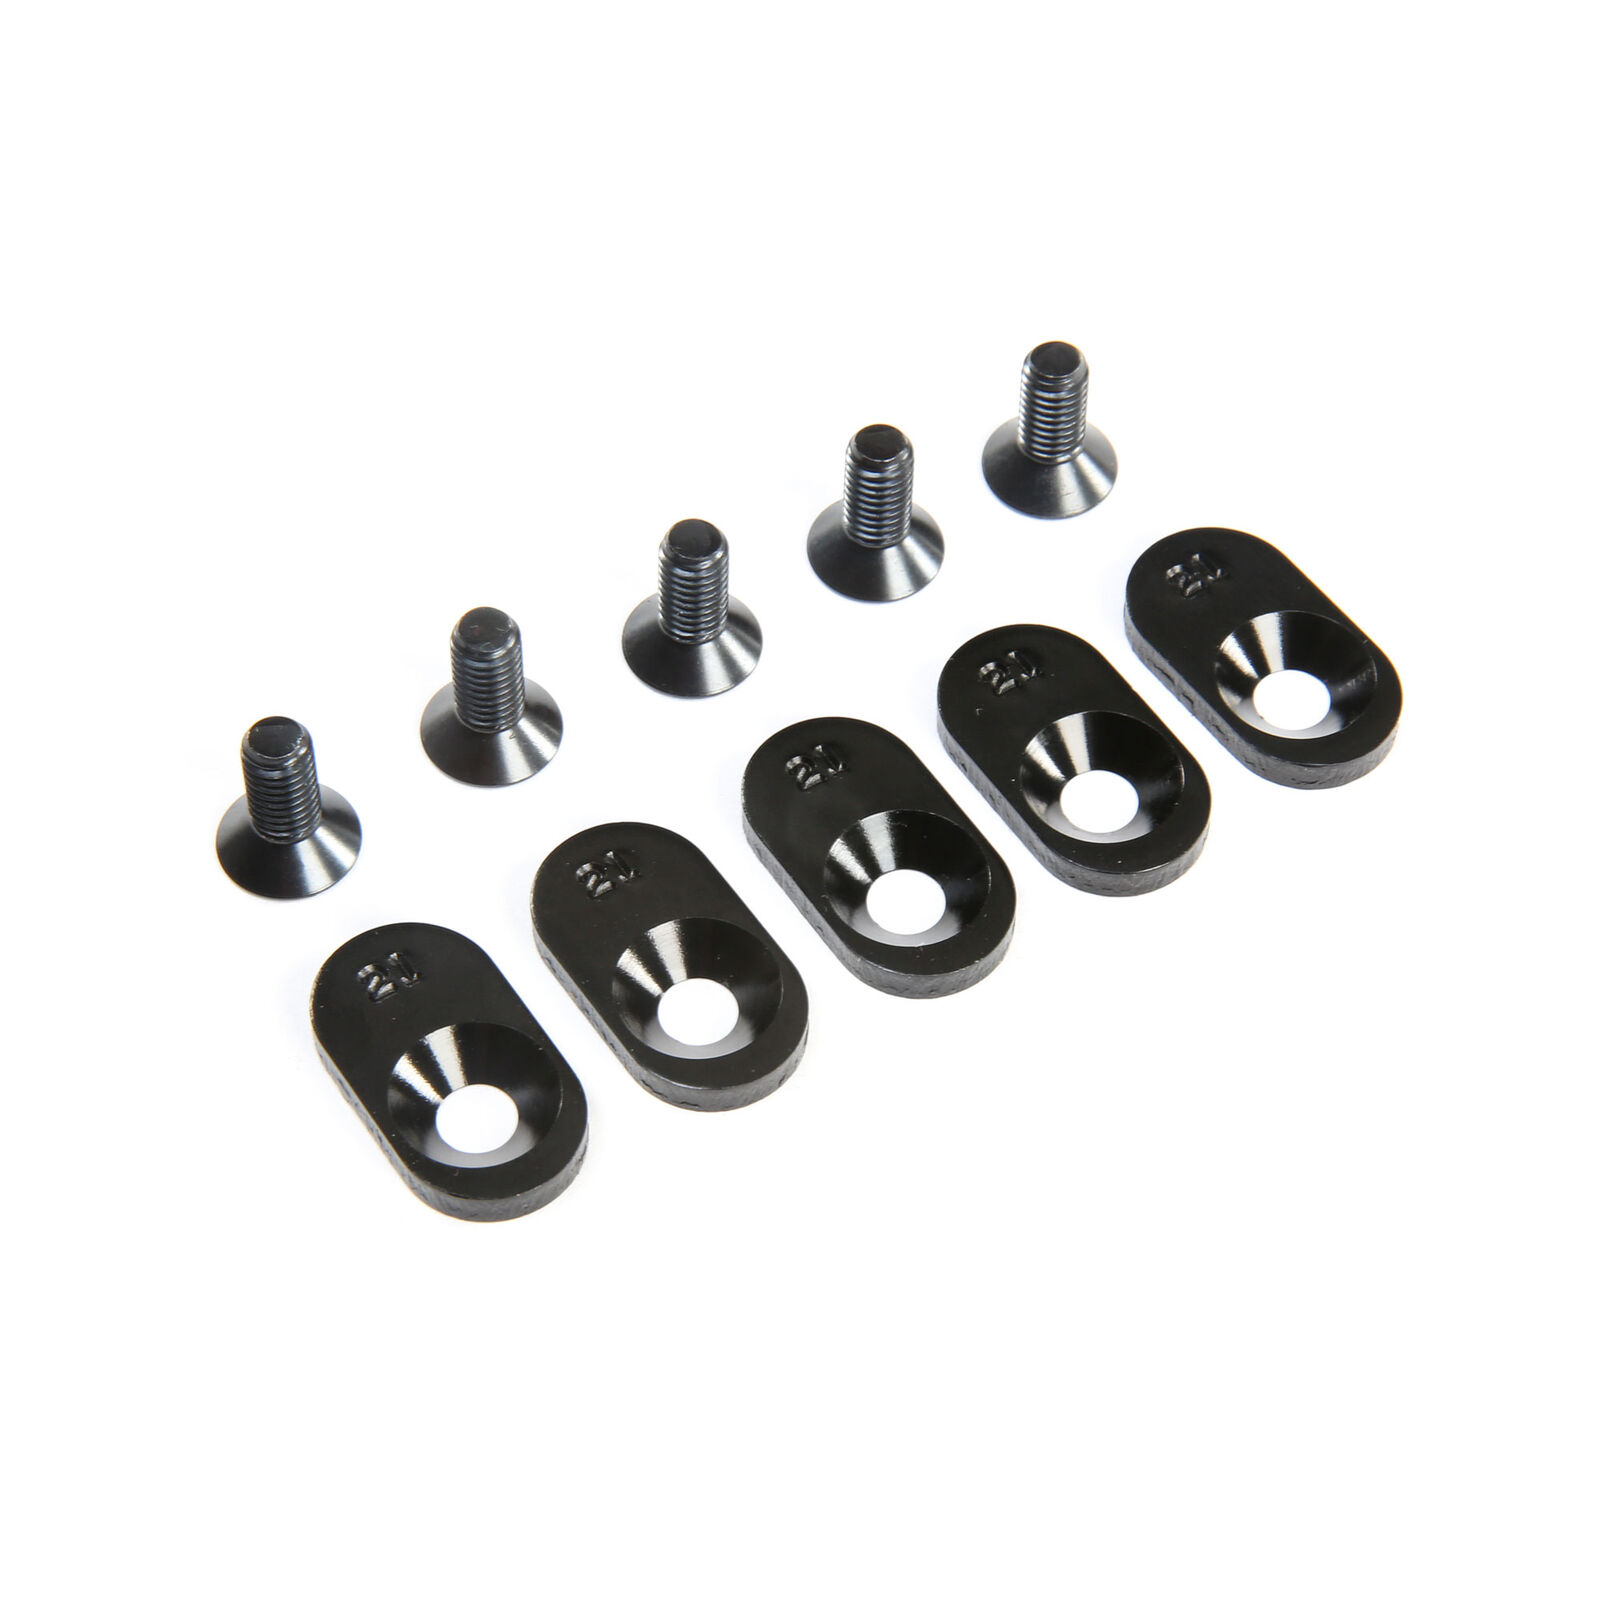 Engine Mount Insert and Screws 21T, Black (5): 5ive-T 2.0 (fits 62T spur)